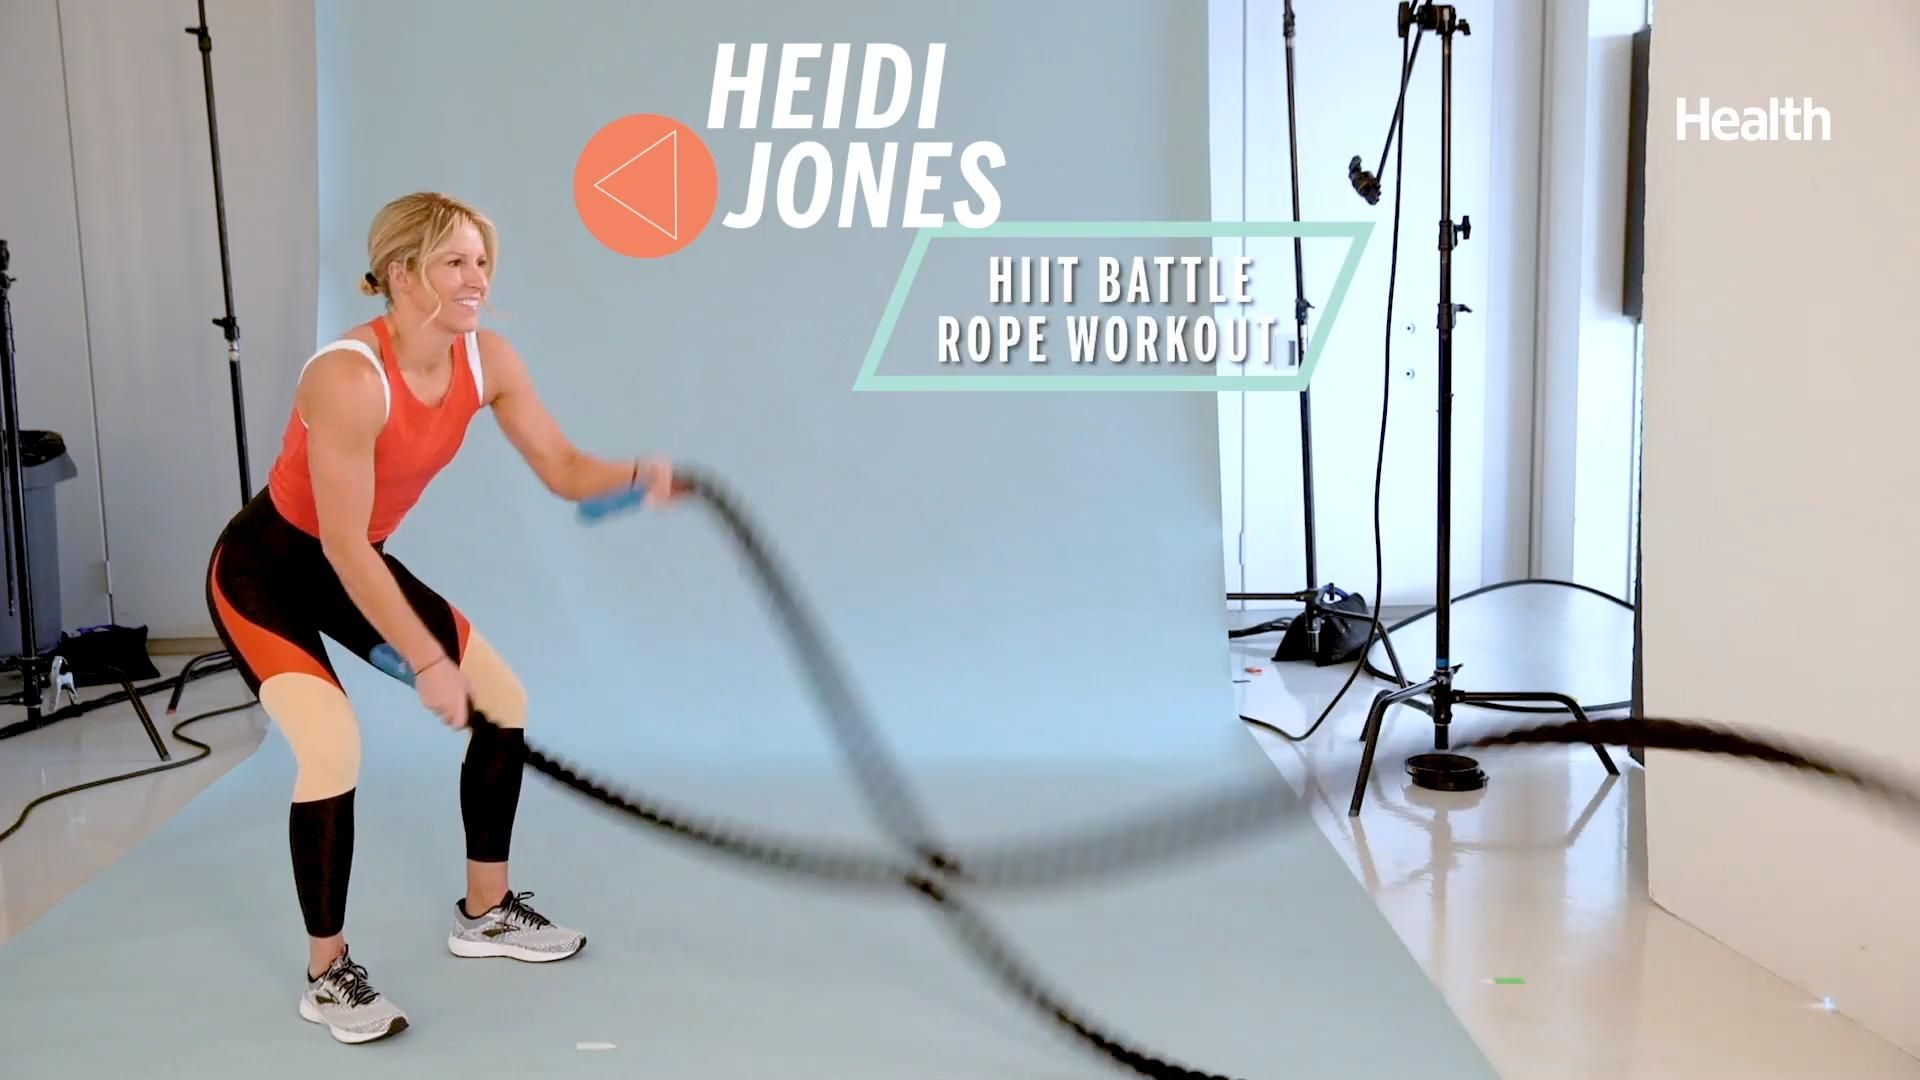 Try This Battle Rope Exercise For A Full Body Cardio Workout